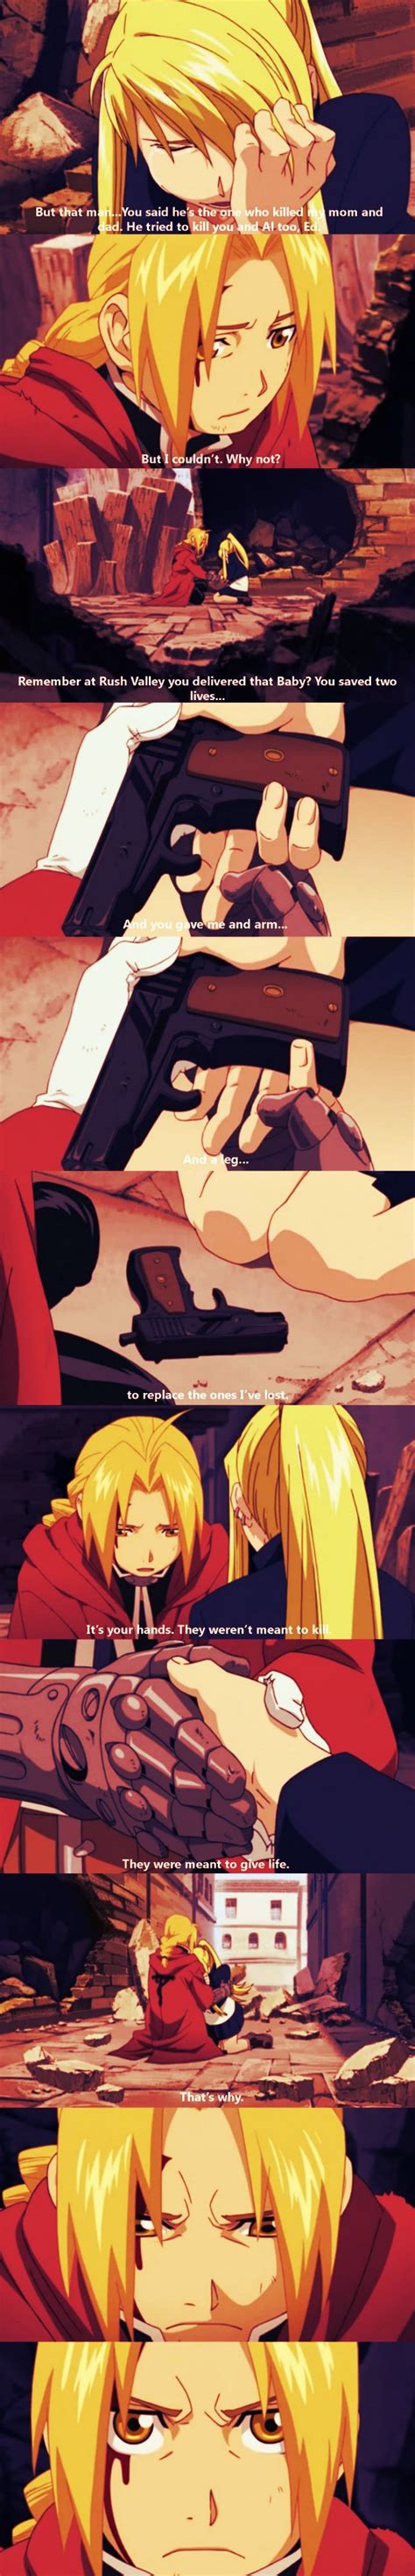 One Of My All Time Favorite Scenes From Fullmetal Alchemist Brotherhood